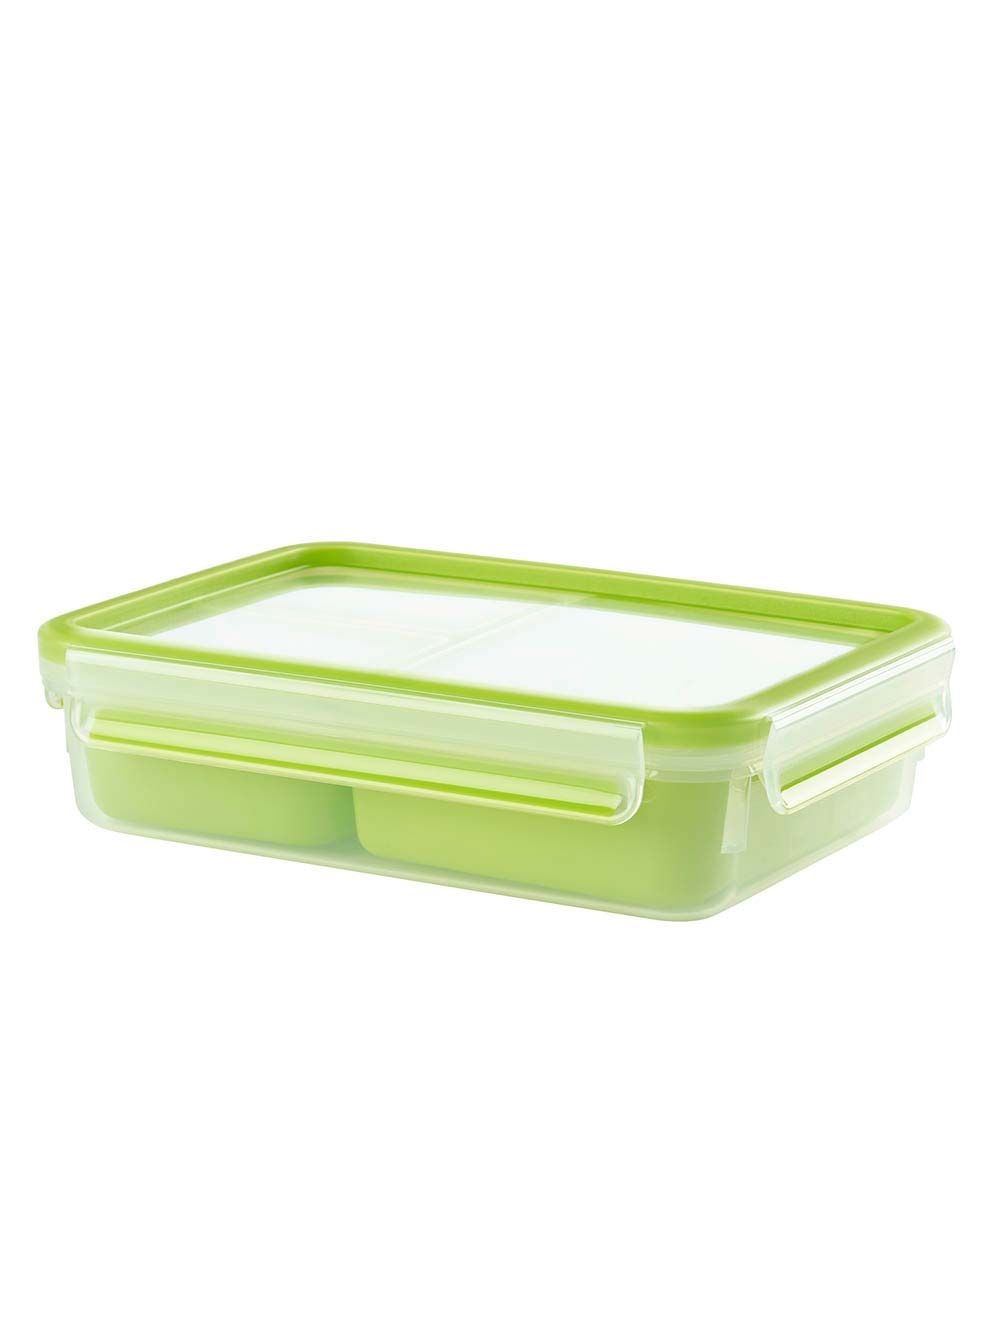 Tefal MasterSeal To Go Snack Box 1.2 L with 3 Inserts, K3100412